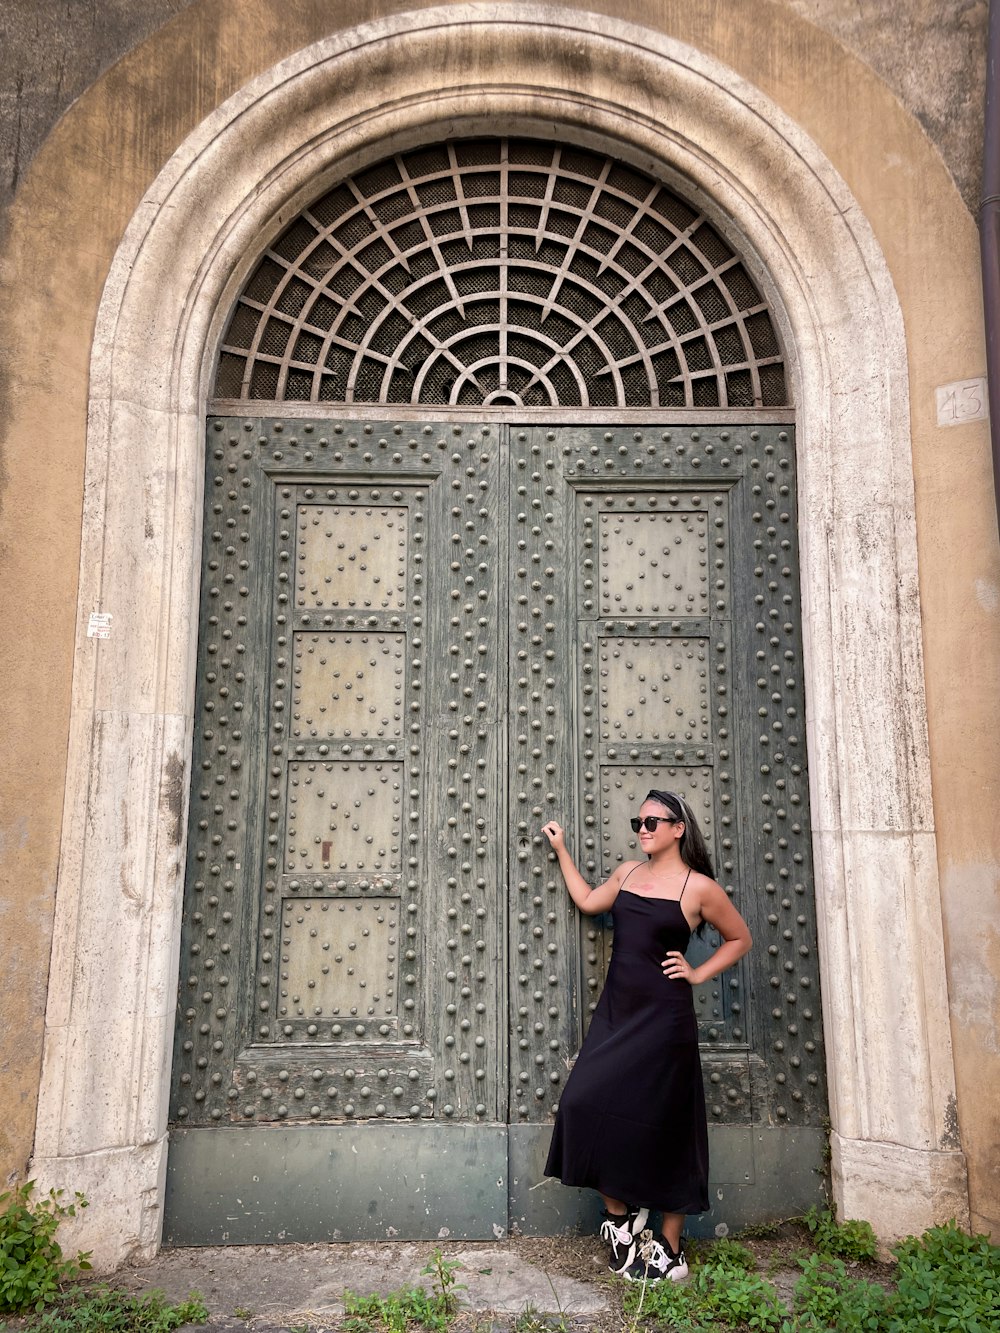 a woman in a black dress standing in front of a door